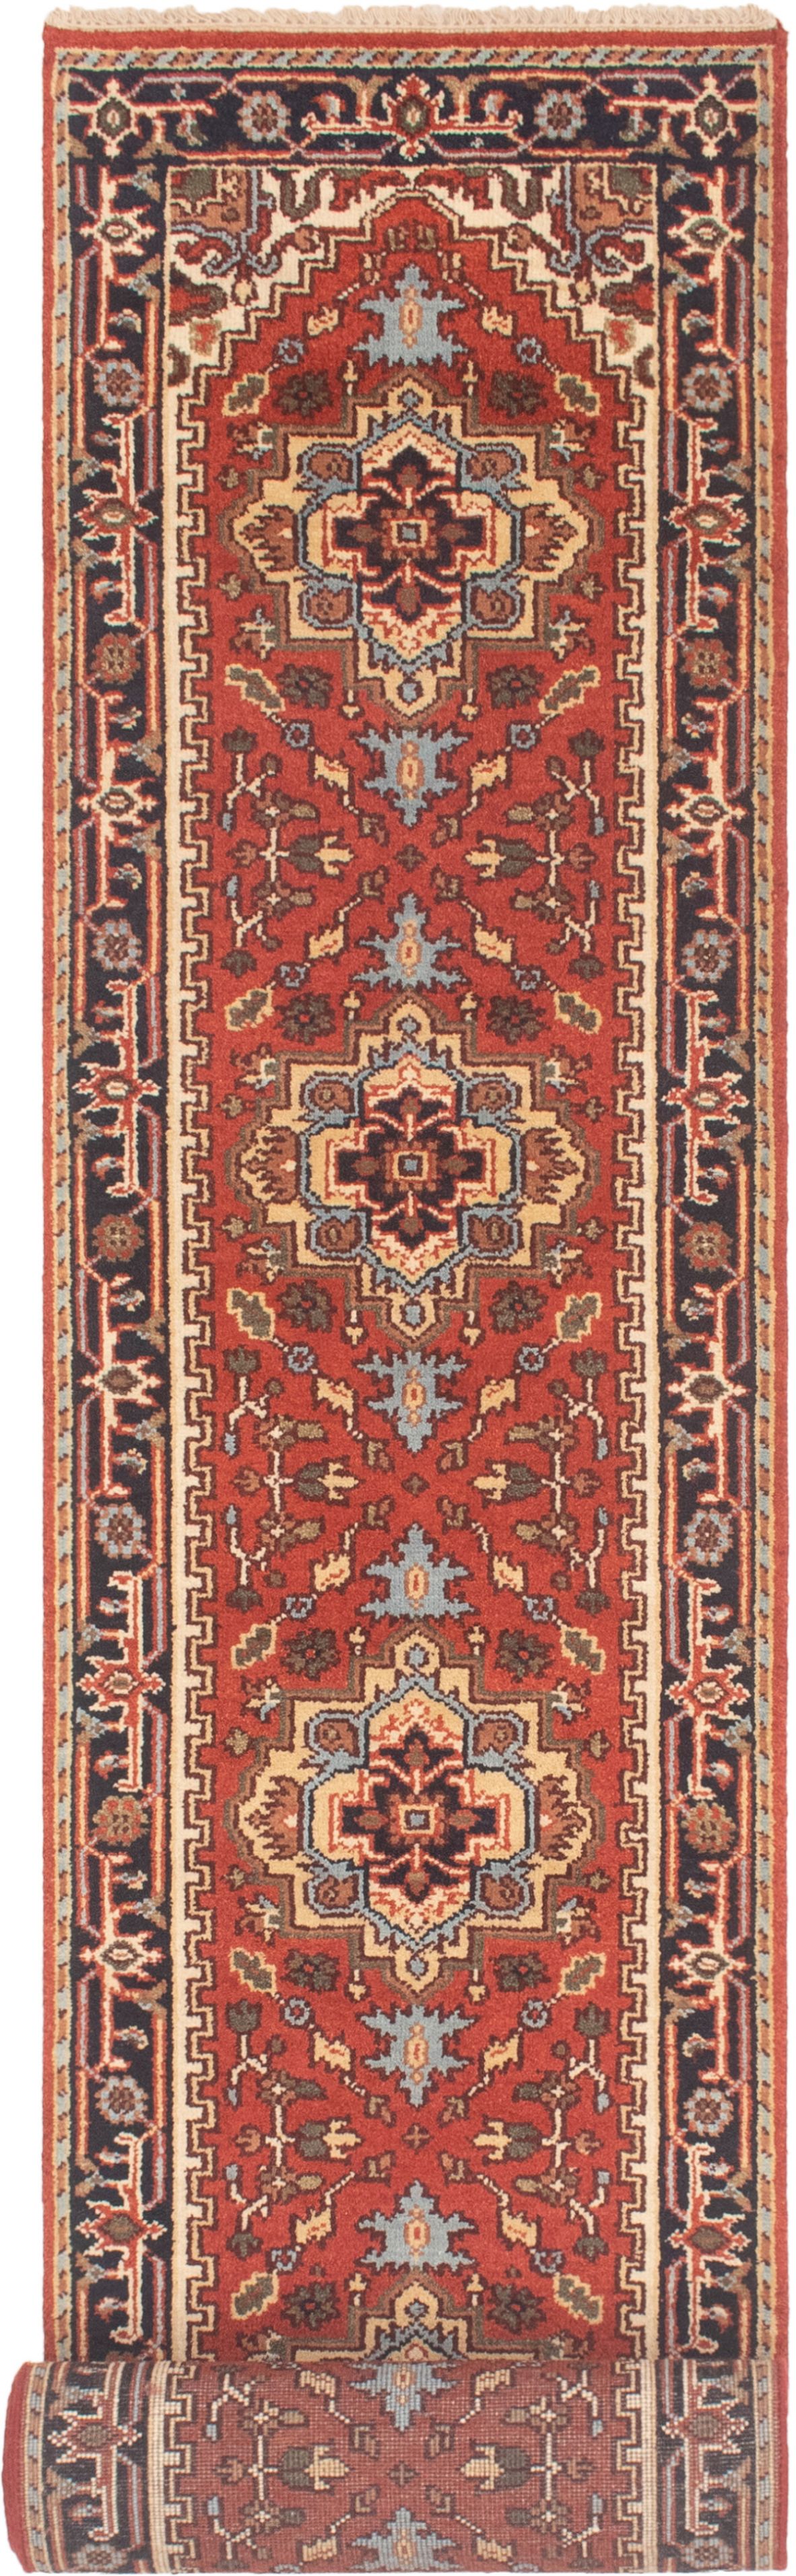 Hand-knotted Serapi Heritage Dark Copper Wool Rug 2'6" x 19'7"  Size: 2'6" x 19'7"  